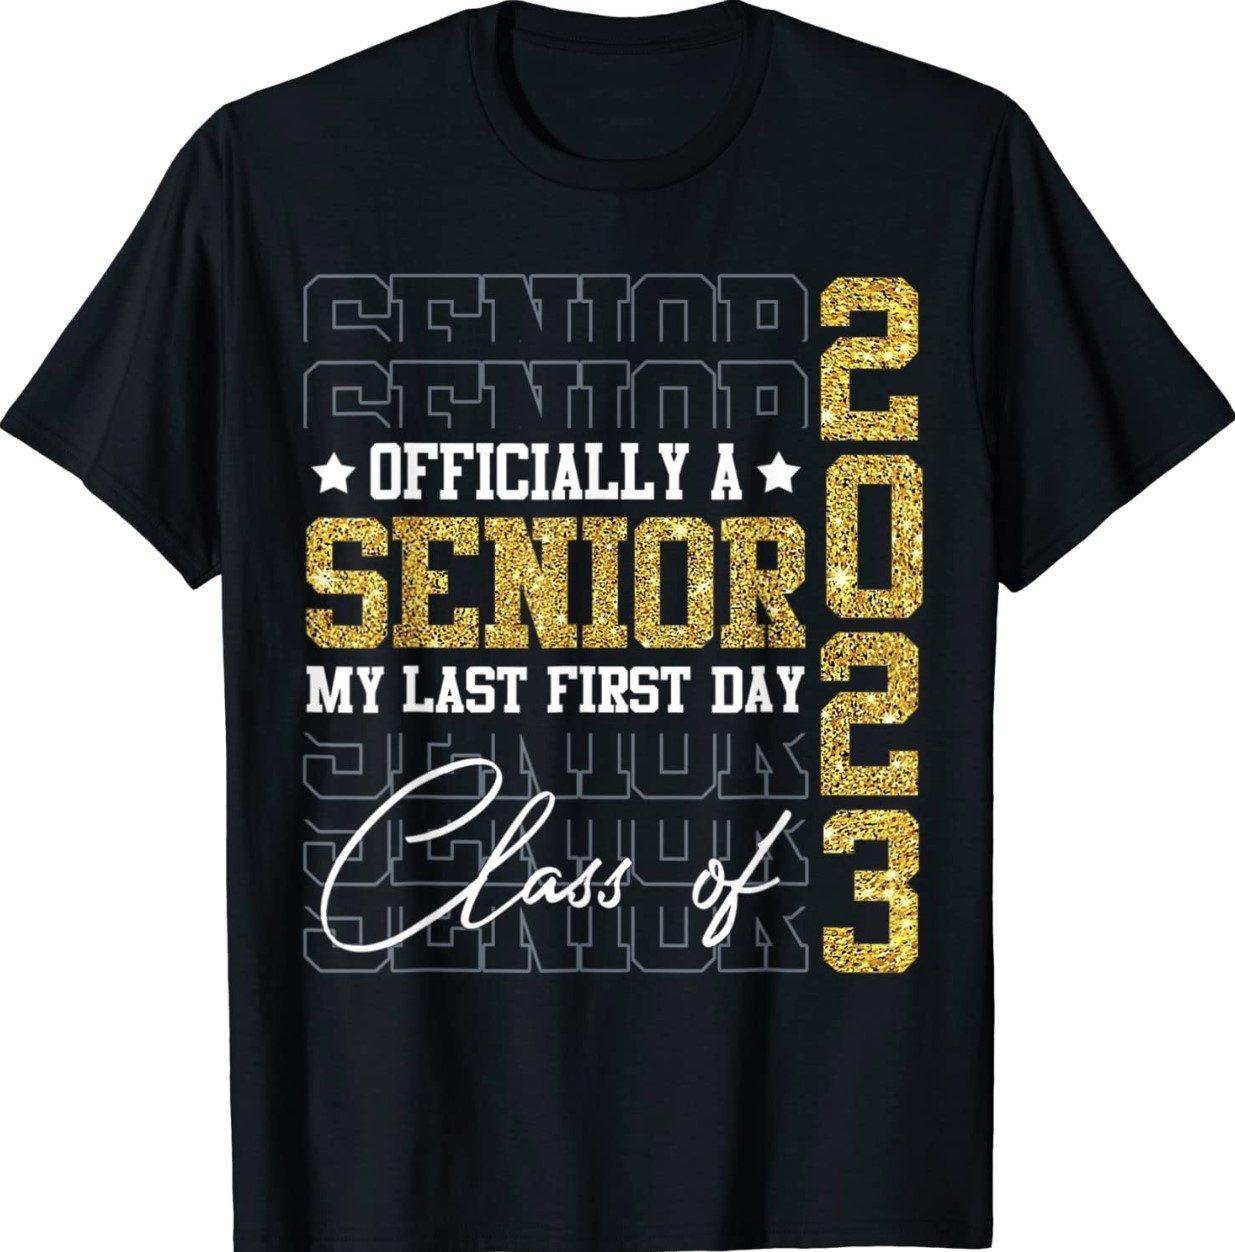 Senior 2023 Graduation My Last First Day Of Class Of 2023 Shirts ...